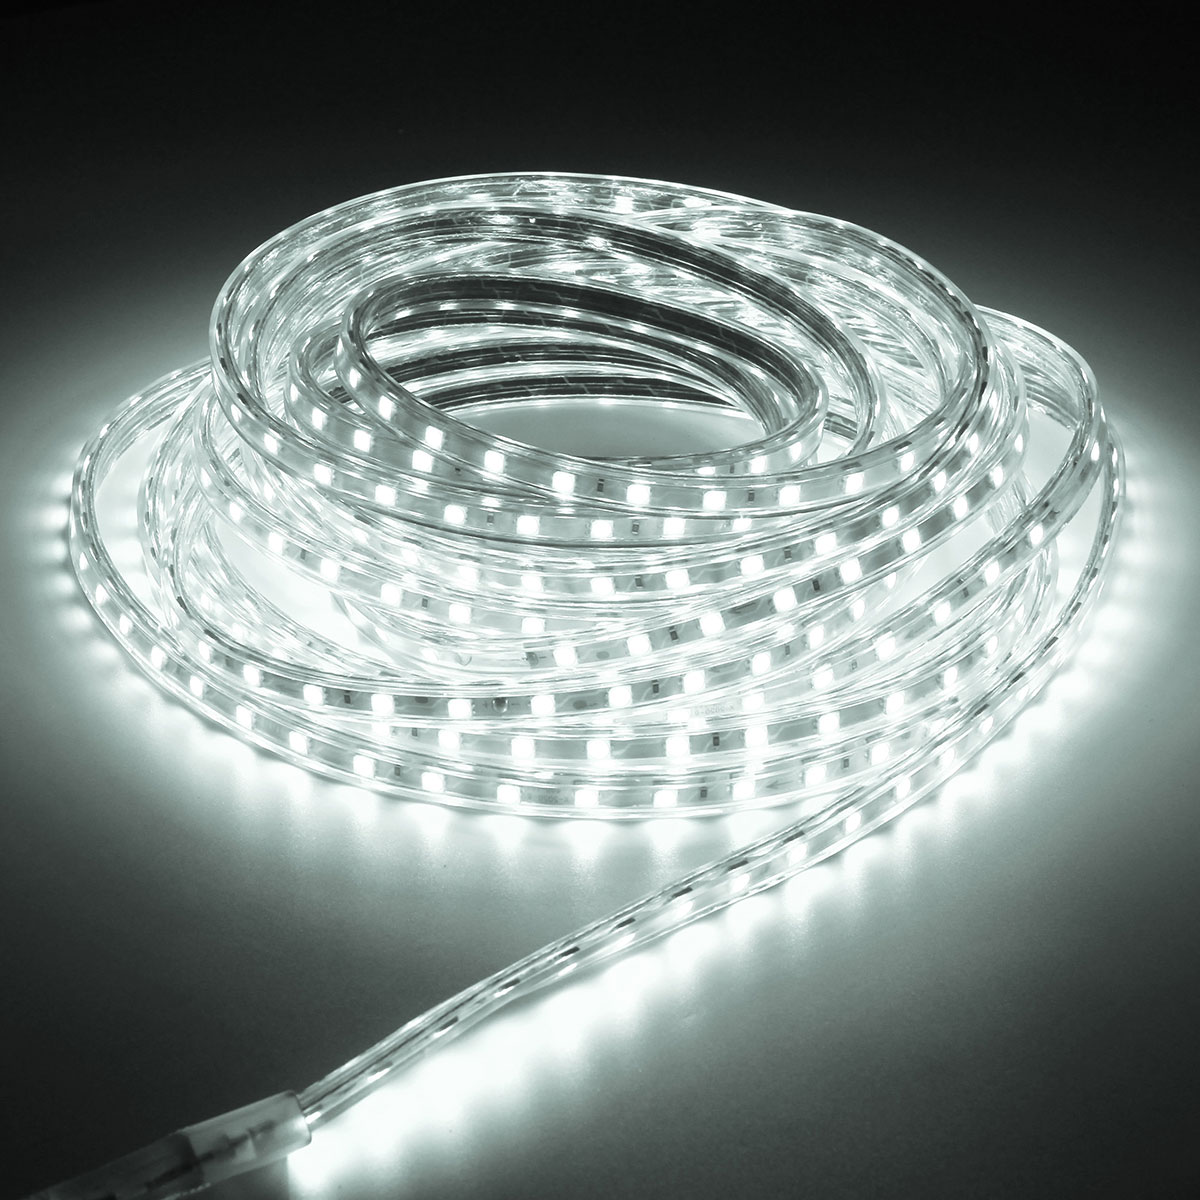 8M-5050-LED-SMD-Outdoor-Waterproof-Flexible-Tape-Rope-Strip-Light-Xmas-220V-1066360-5